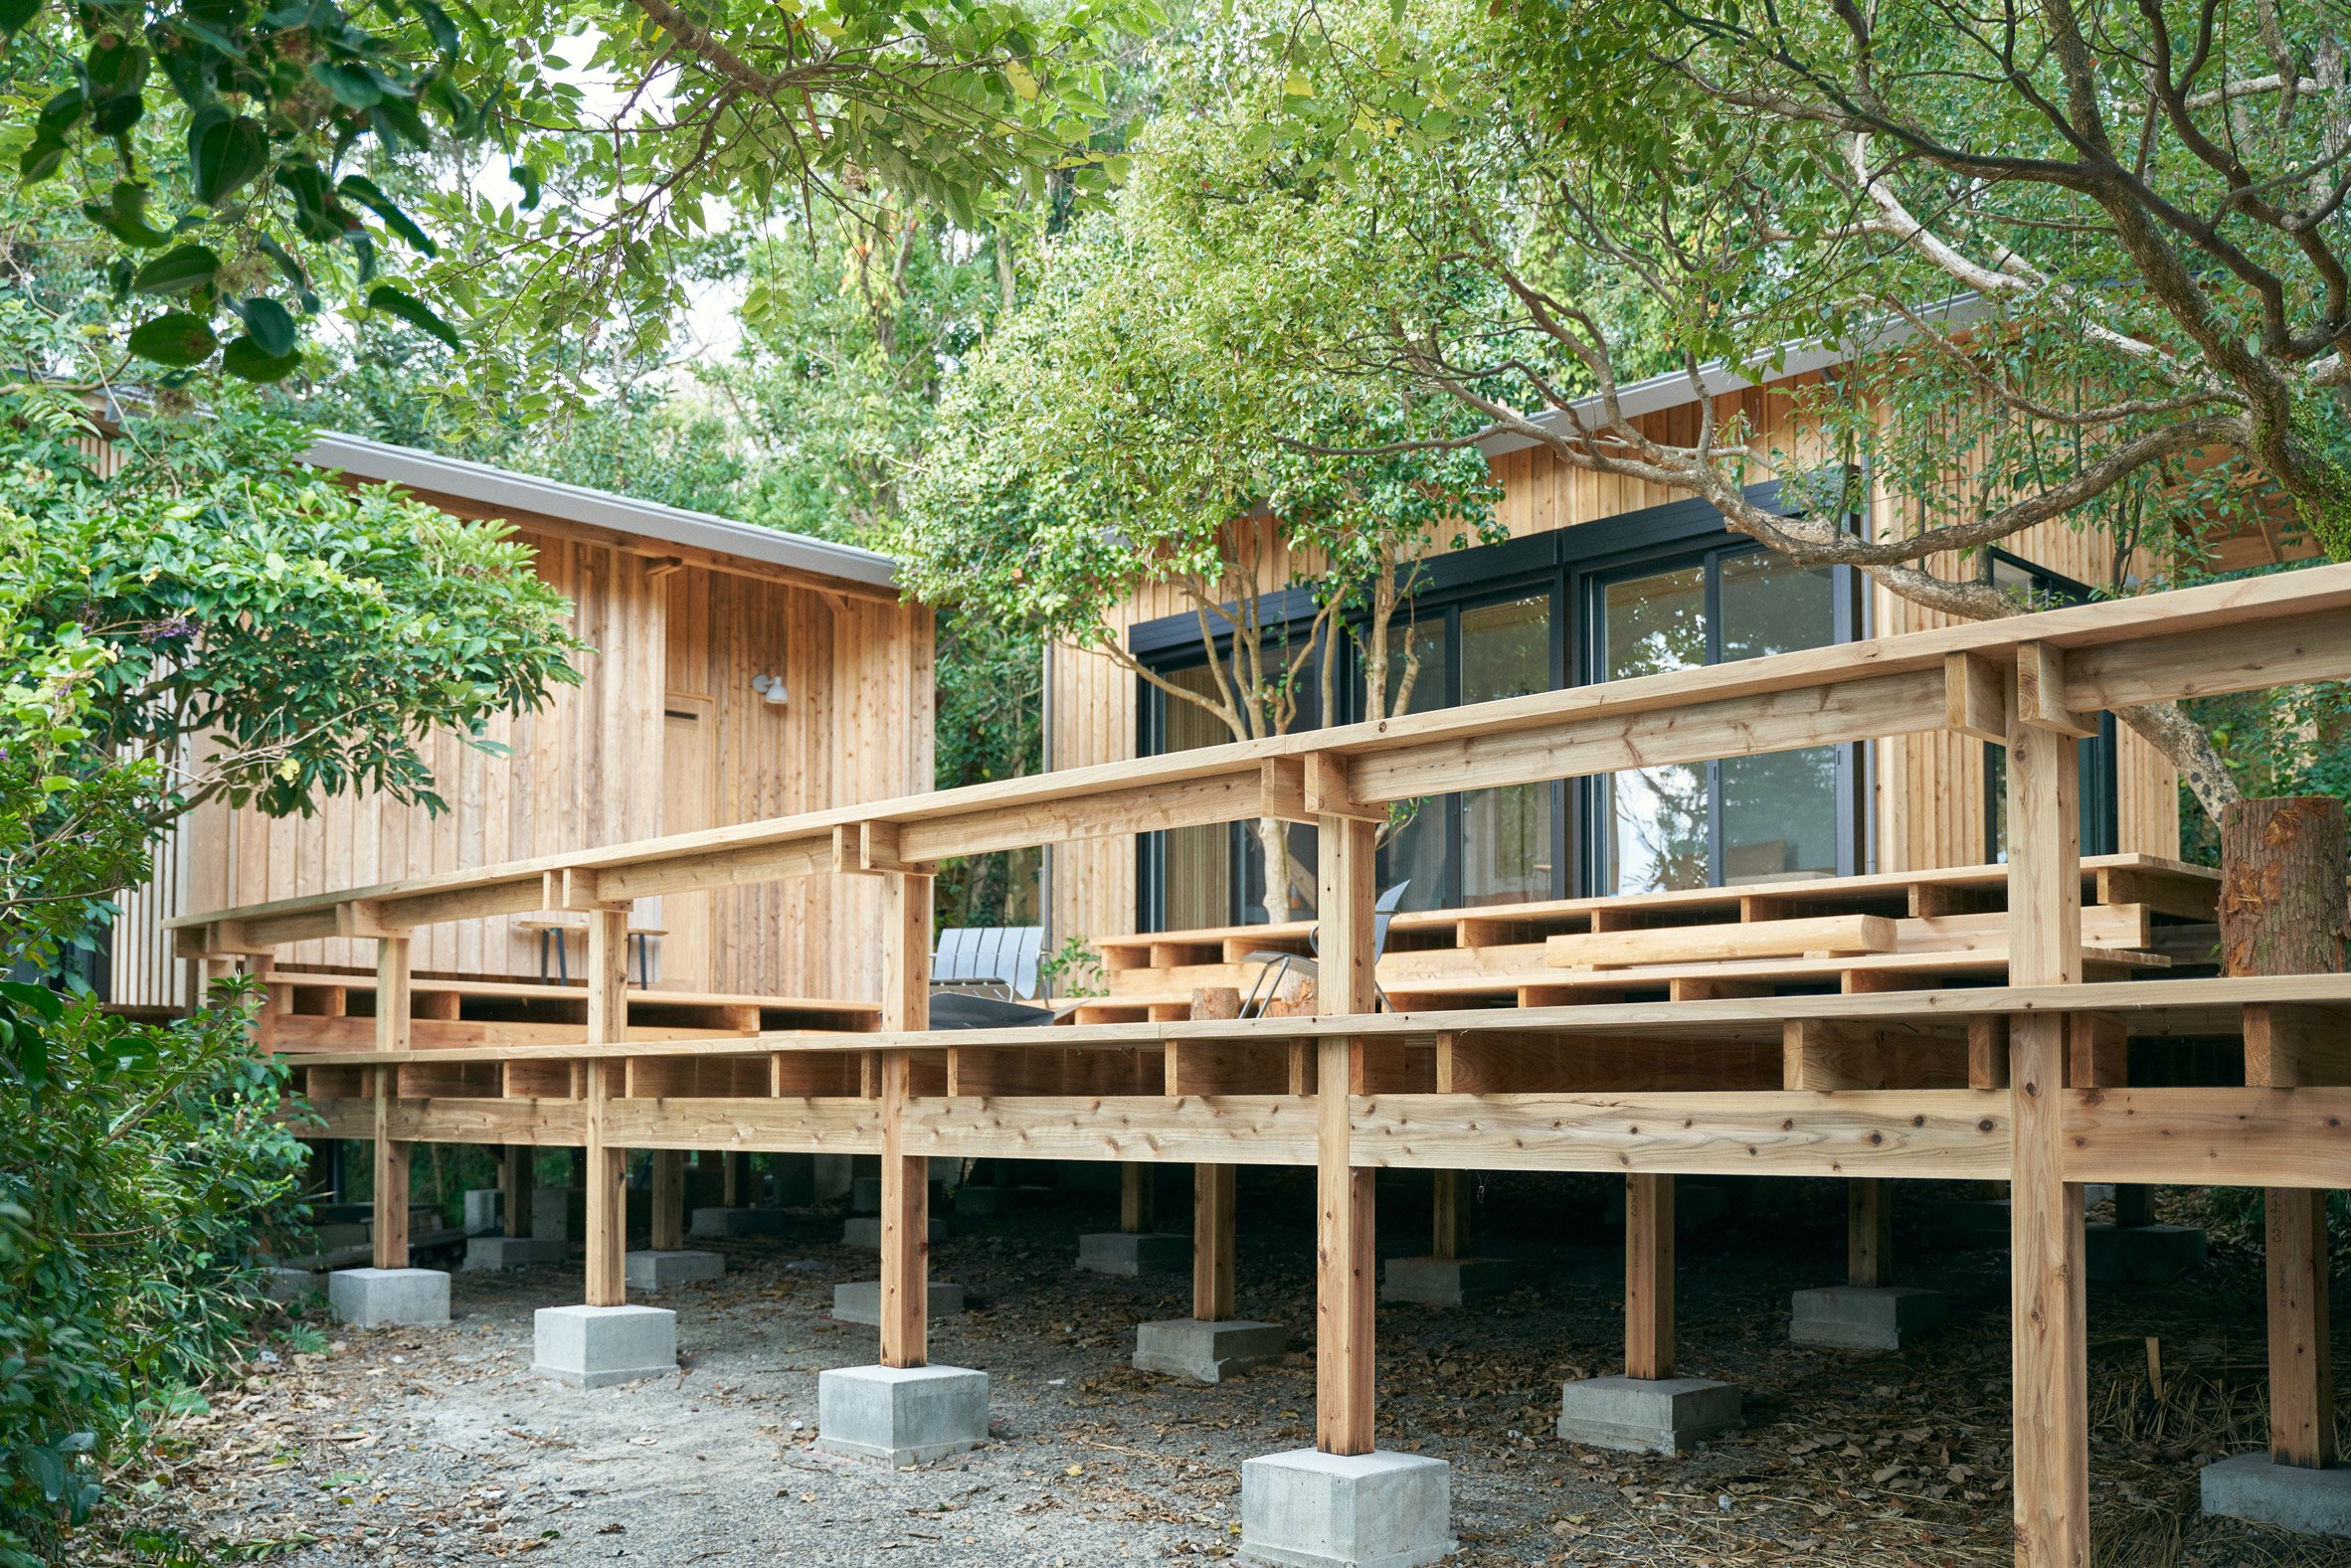 Wooden co-operative housing in Japan